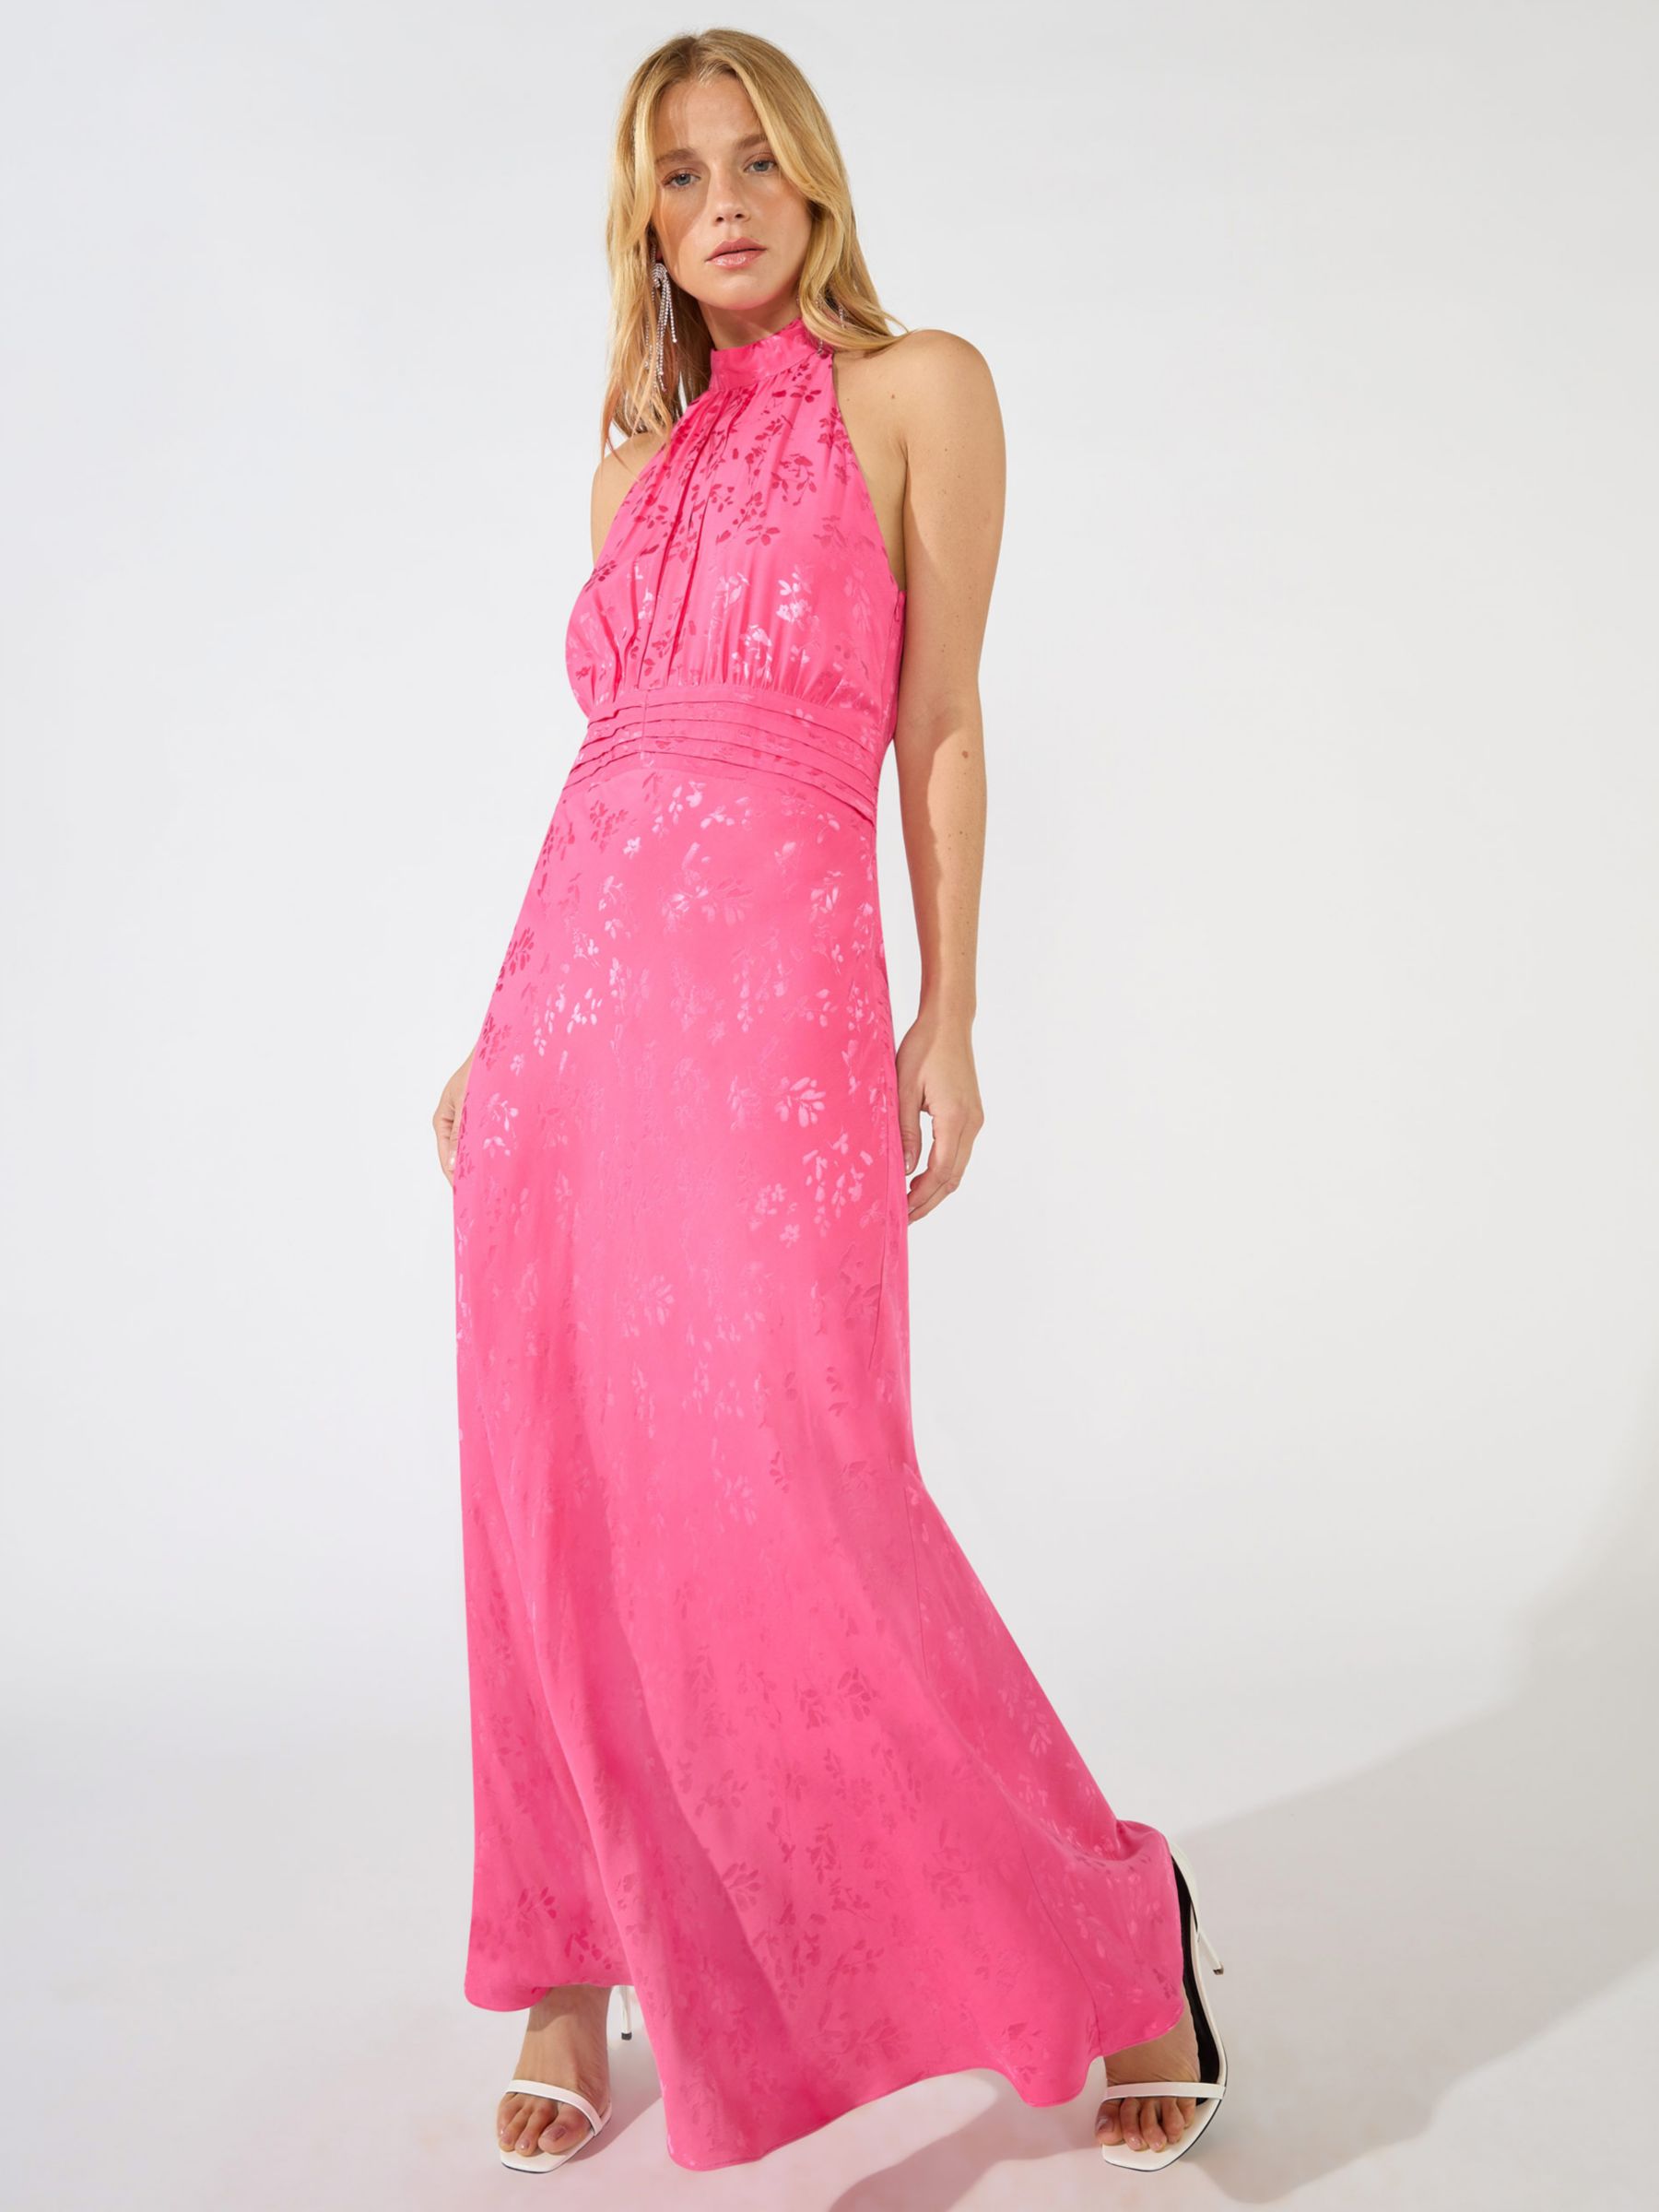 Women's soft and light pink high low satin evening gown with elegant lace  work all over